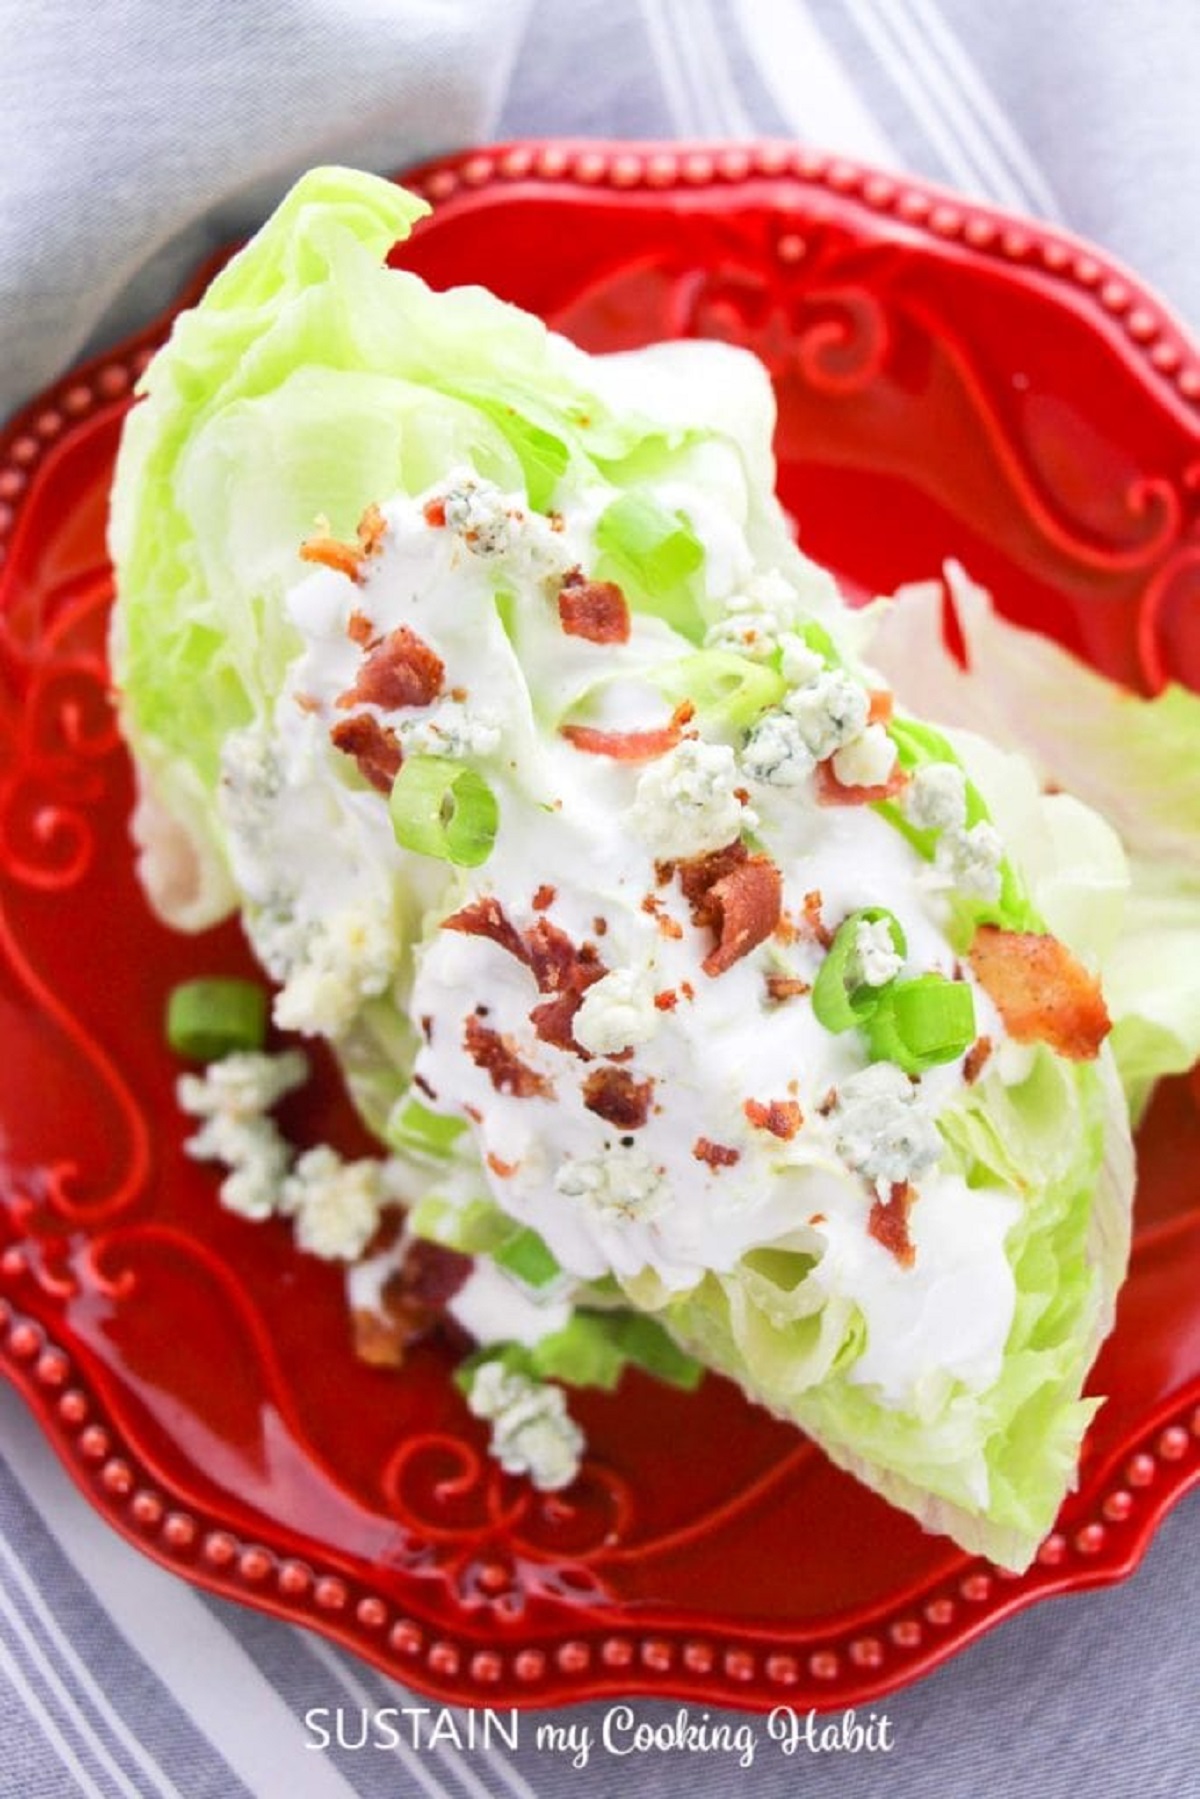 Wedge of iceberg lettuce covered in dressing and bacon bits on a bright red plate.